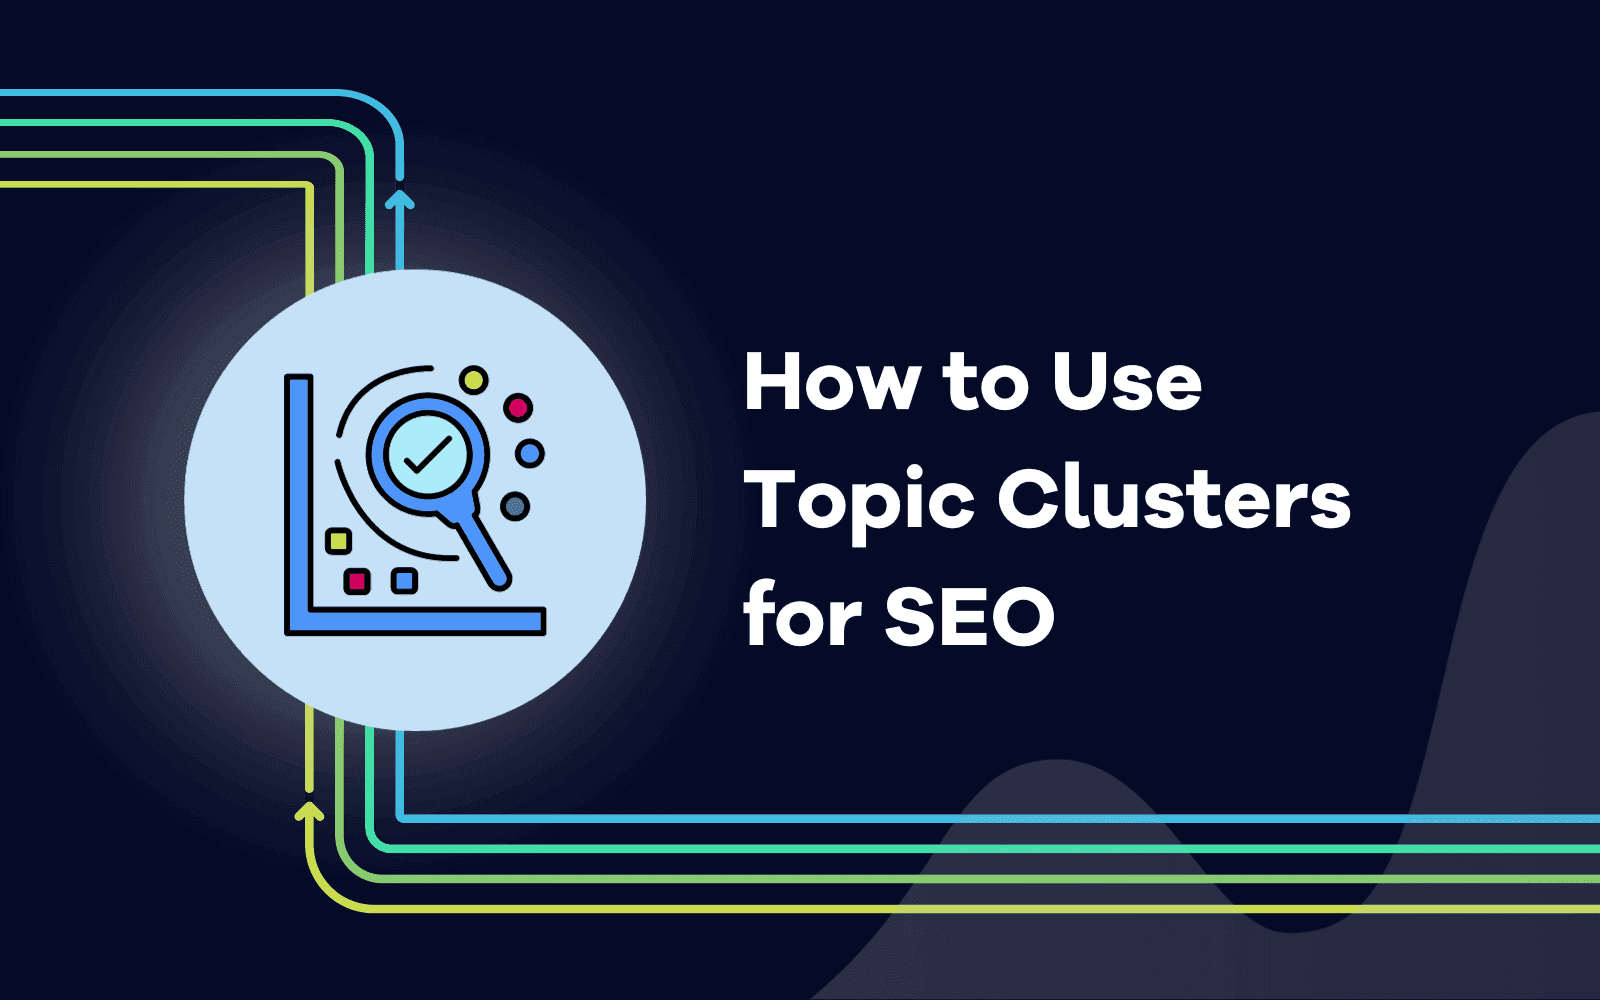 How to Use Topic Clusters for SEO